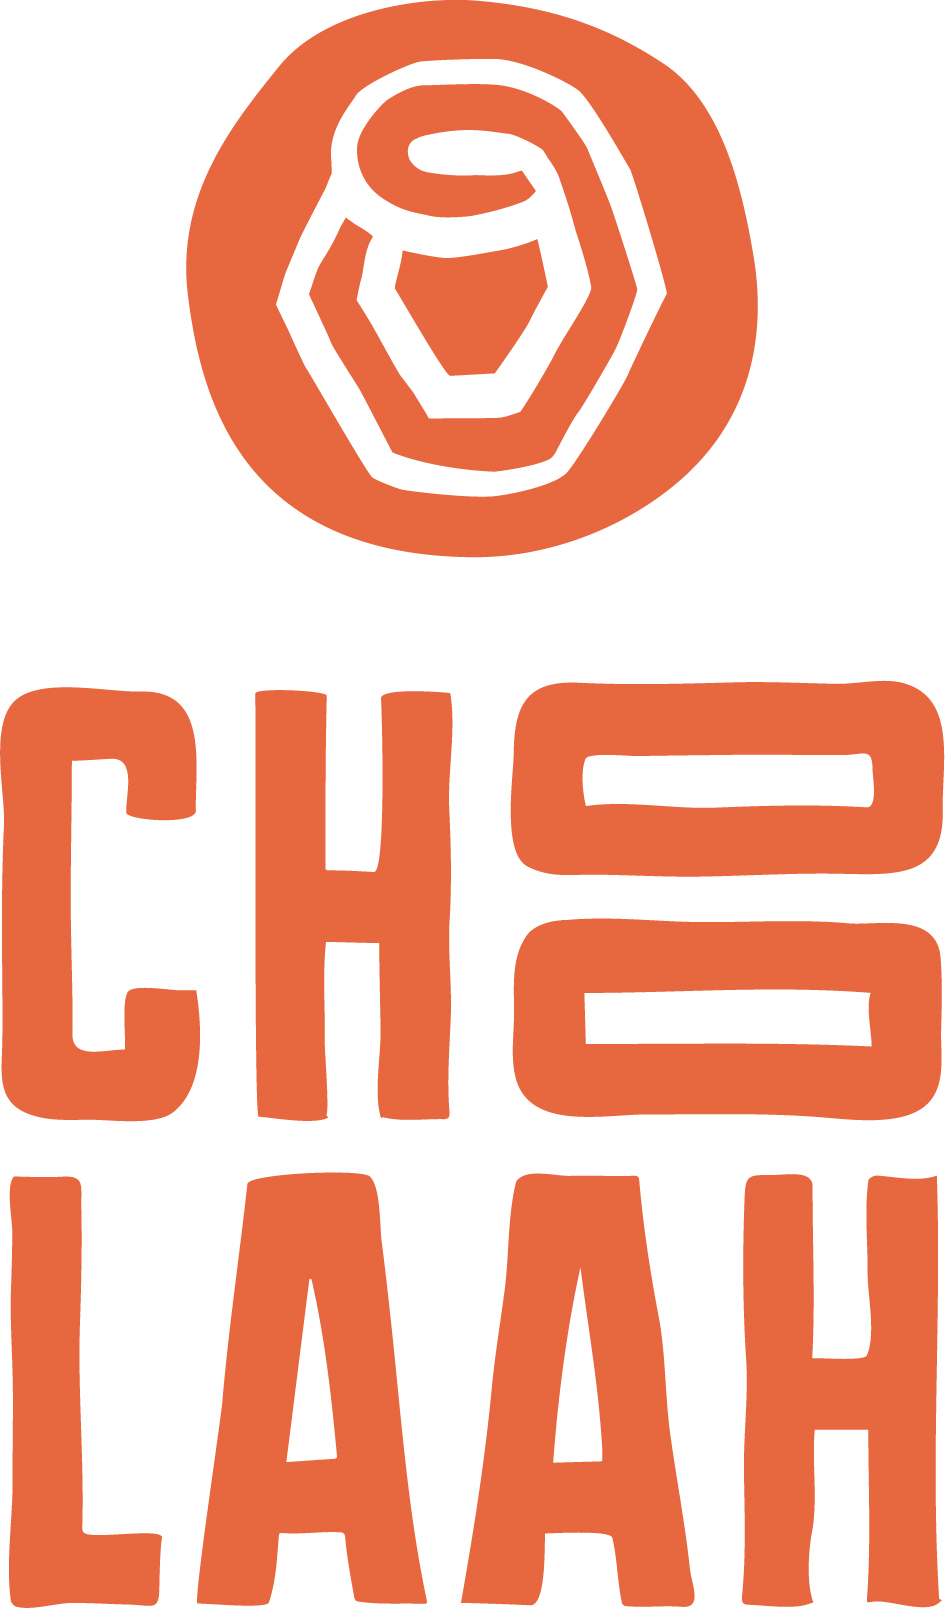 choolaahlogo_full-stacked_notag_166pms-copy.jpg